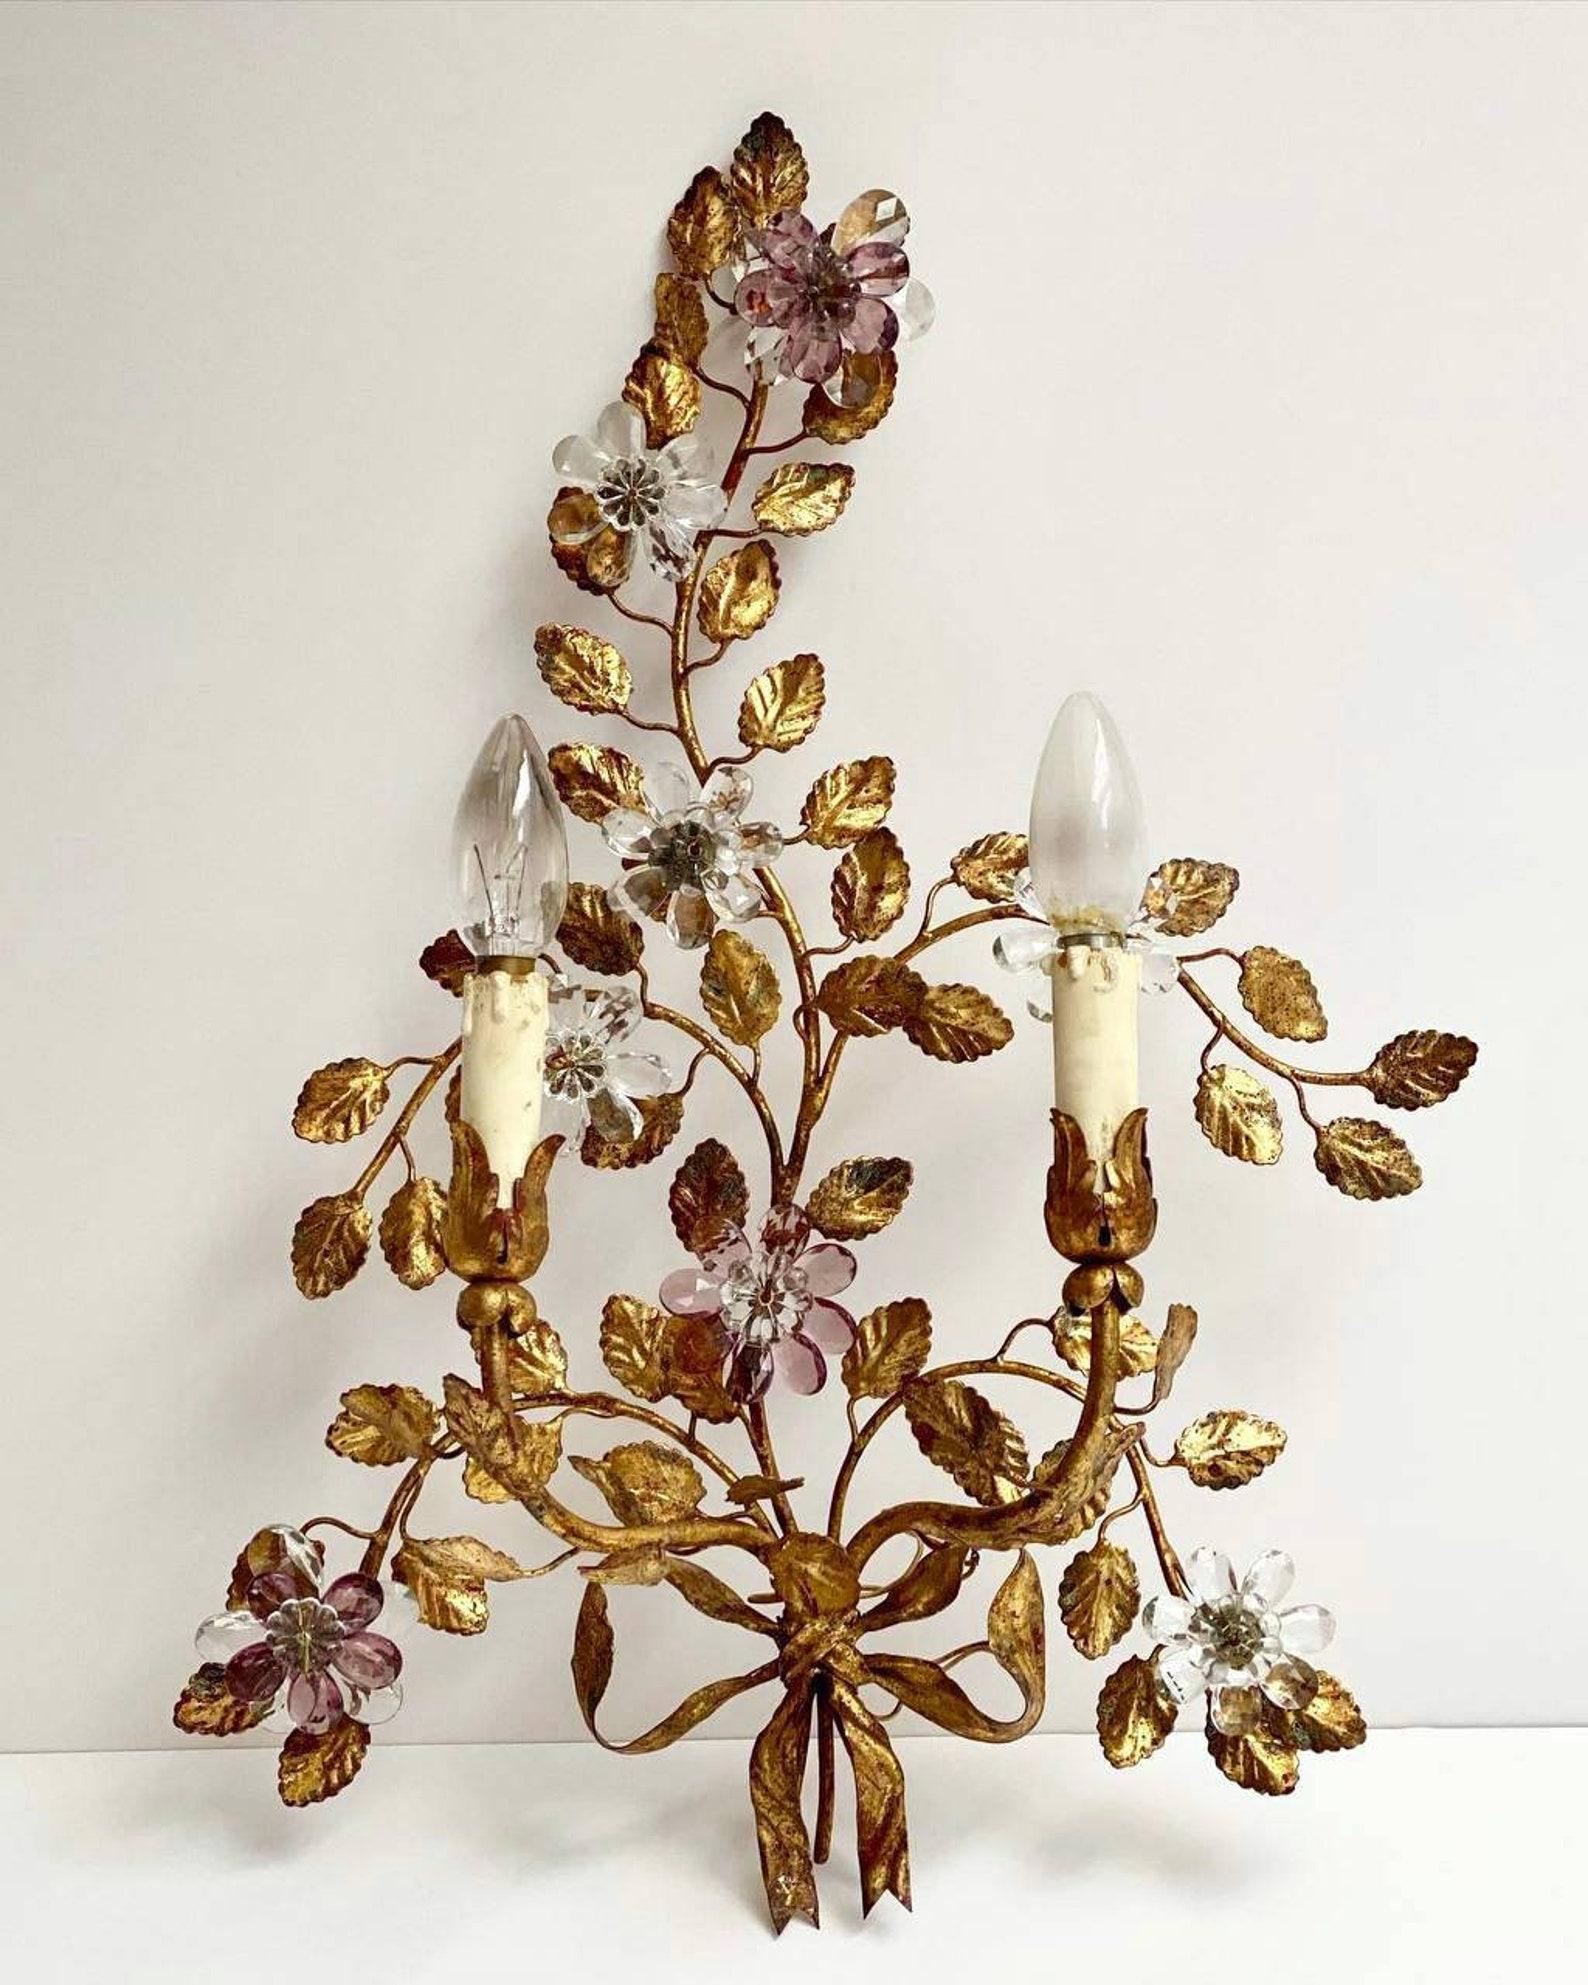 Italian crystal flower and metal wall sconce by Banci Florence, Italy, 1960s. 

A single iron floral sconce by Banci Firenze with crystal flowers and leaves. 

The wall light has a beautiful patina and gives each room an eclectic